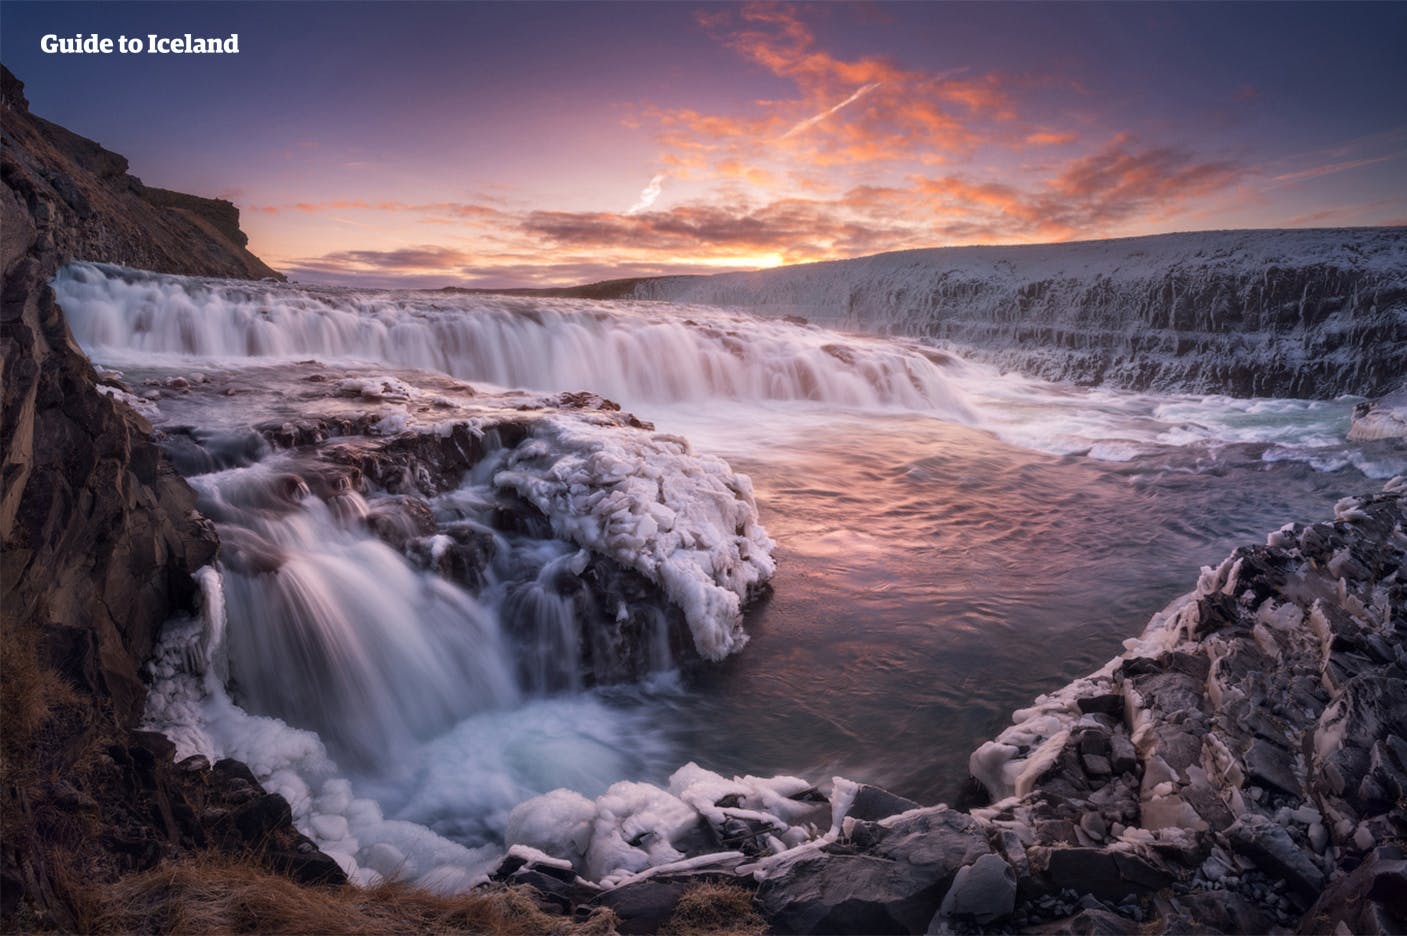 Gullfoss waterfall is one of three sites on the Golden Circle route